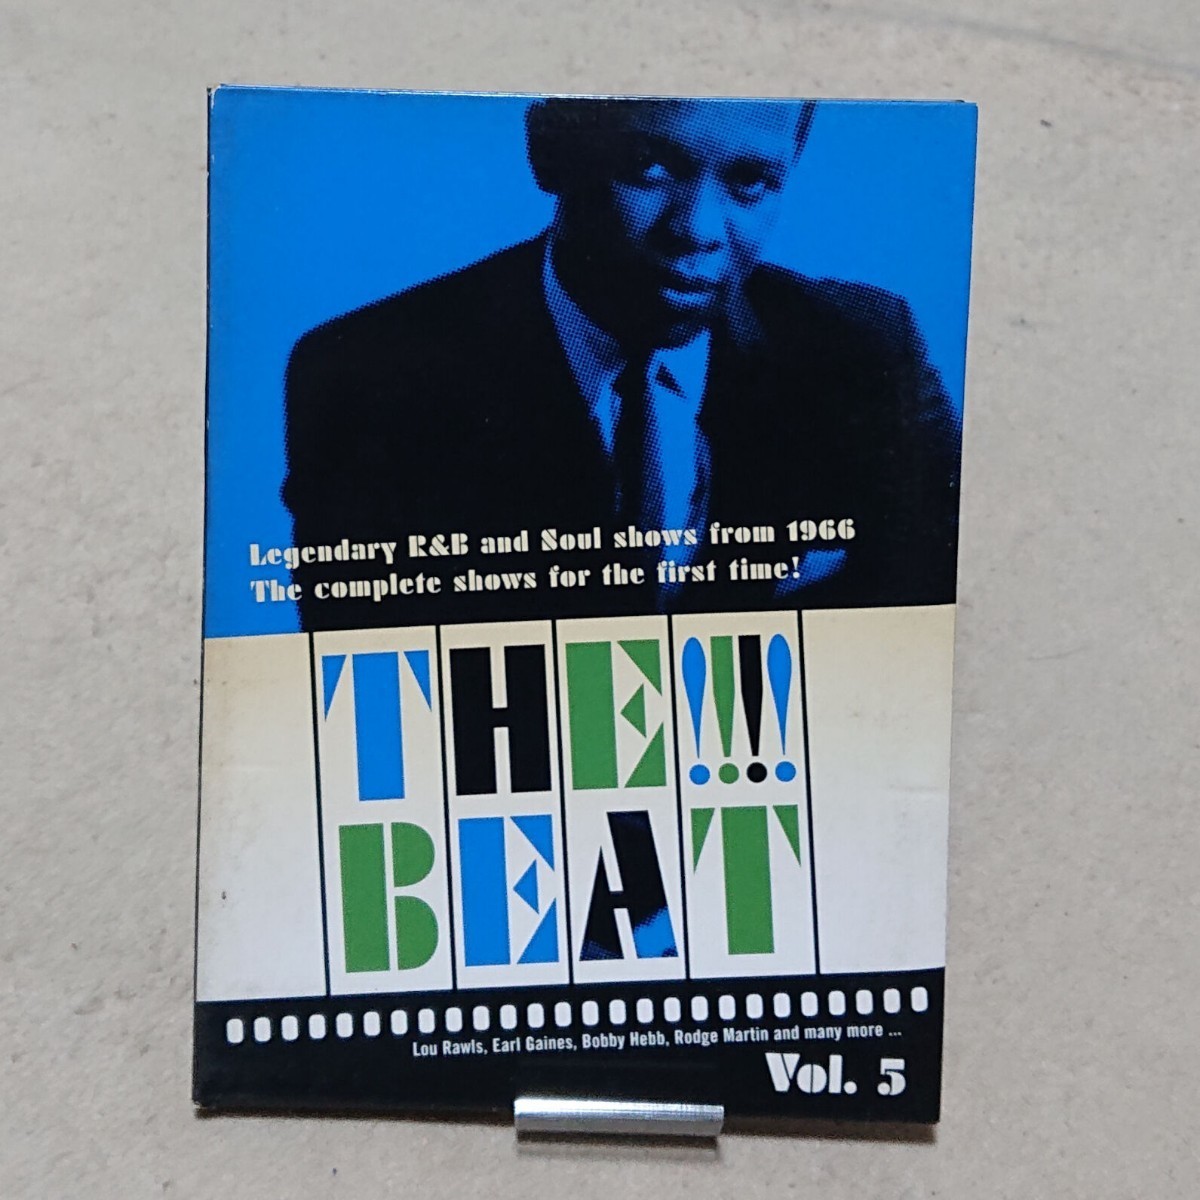 【DVD】The Beat vol.5 Legendary R & B and Soul Shows from 1966_画像1